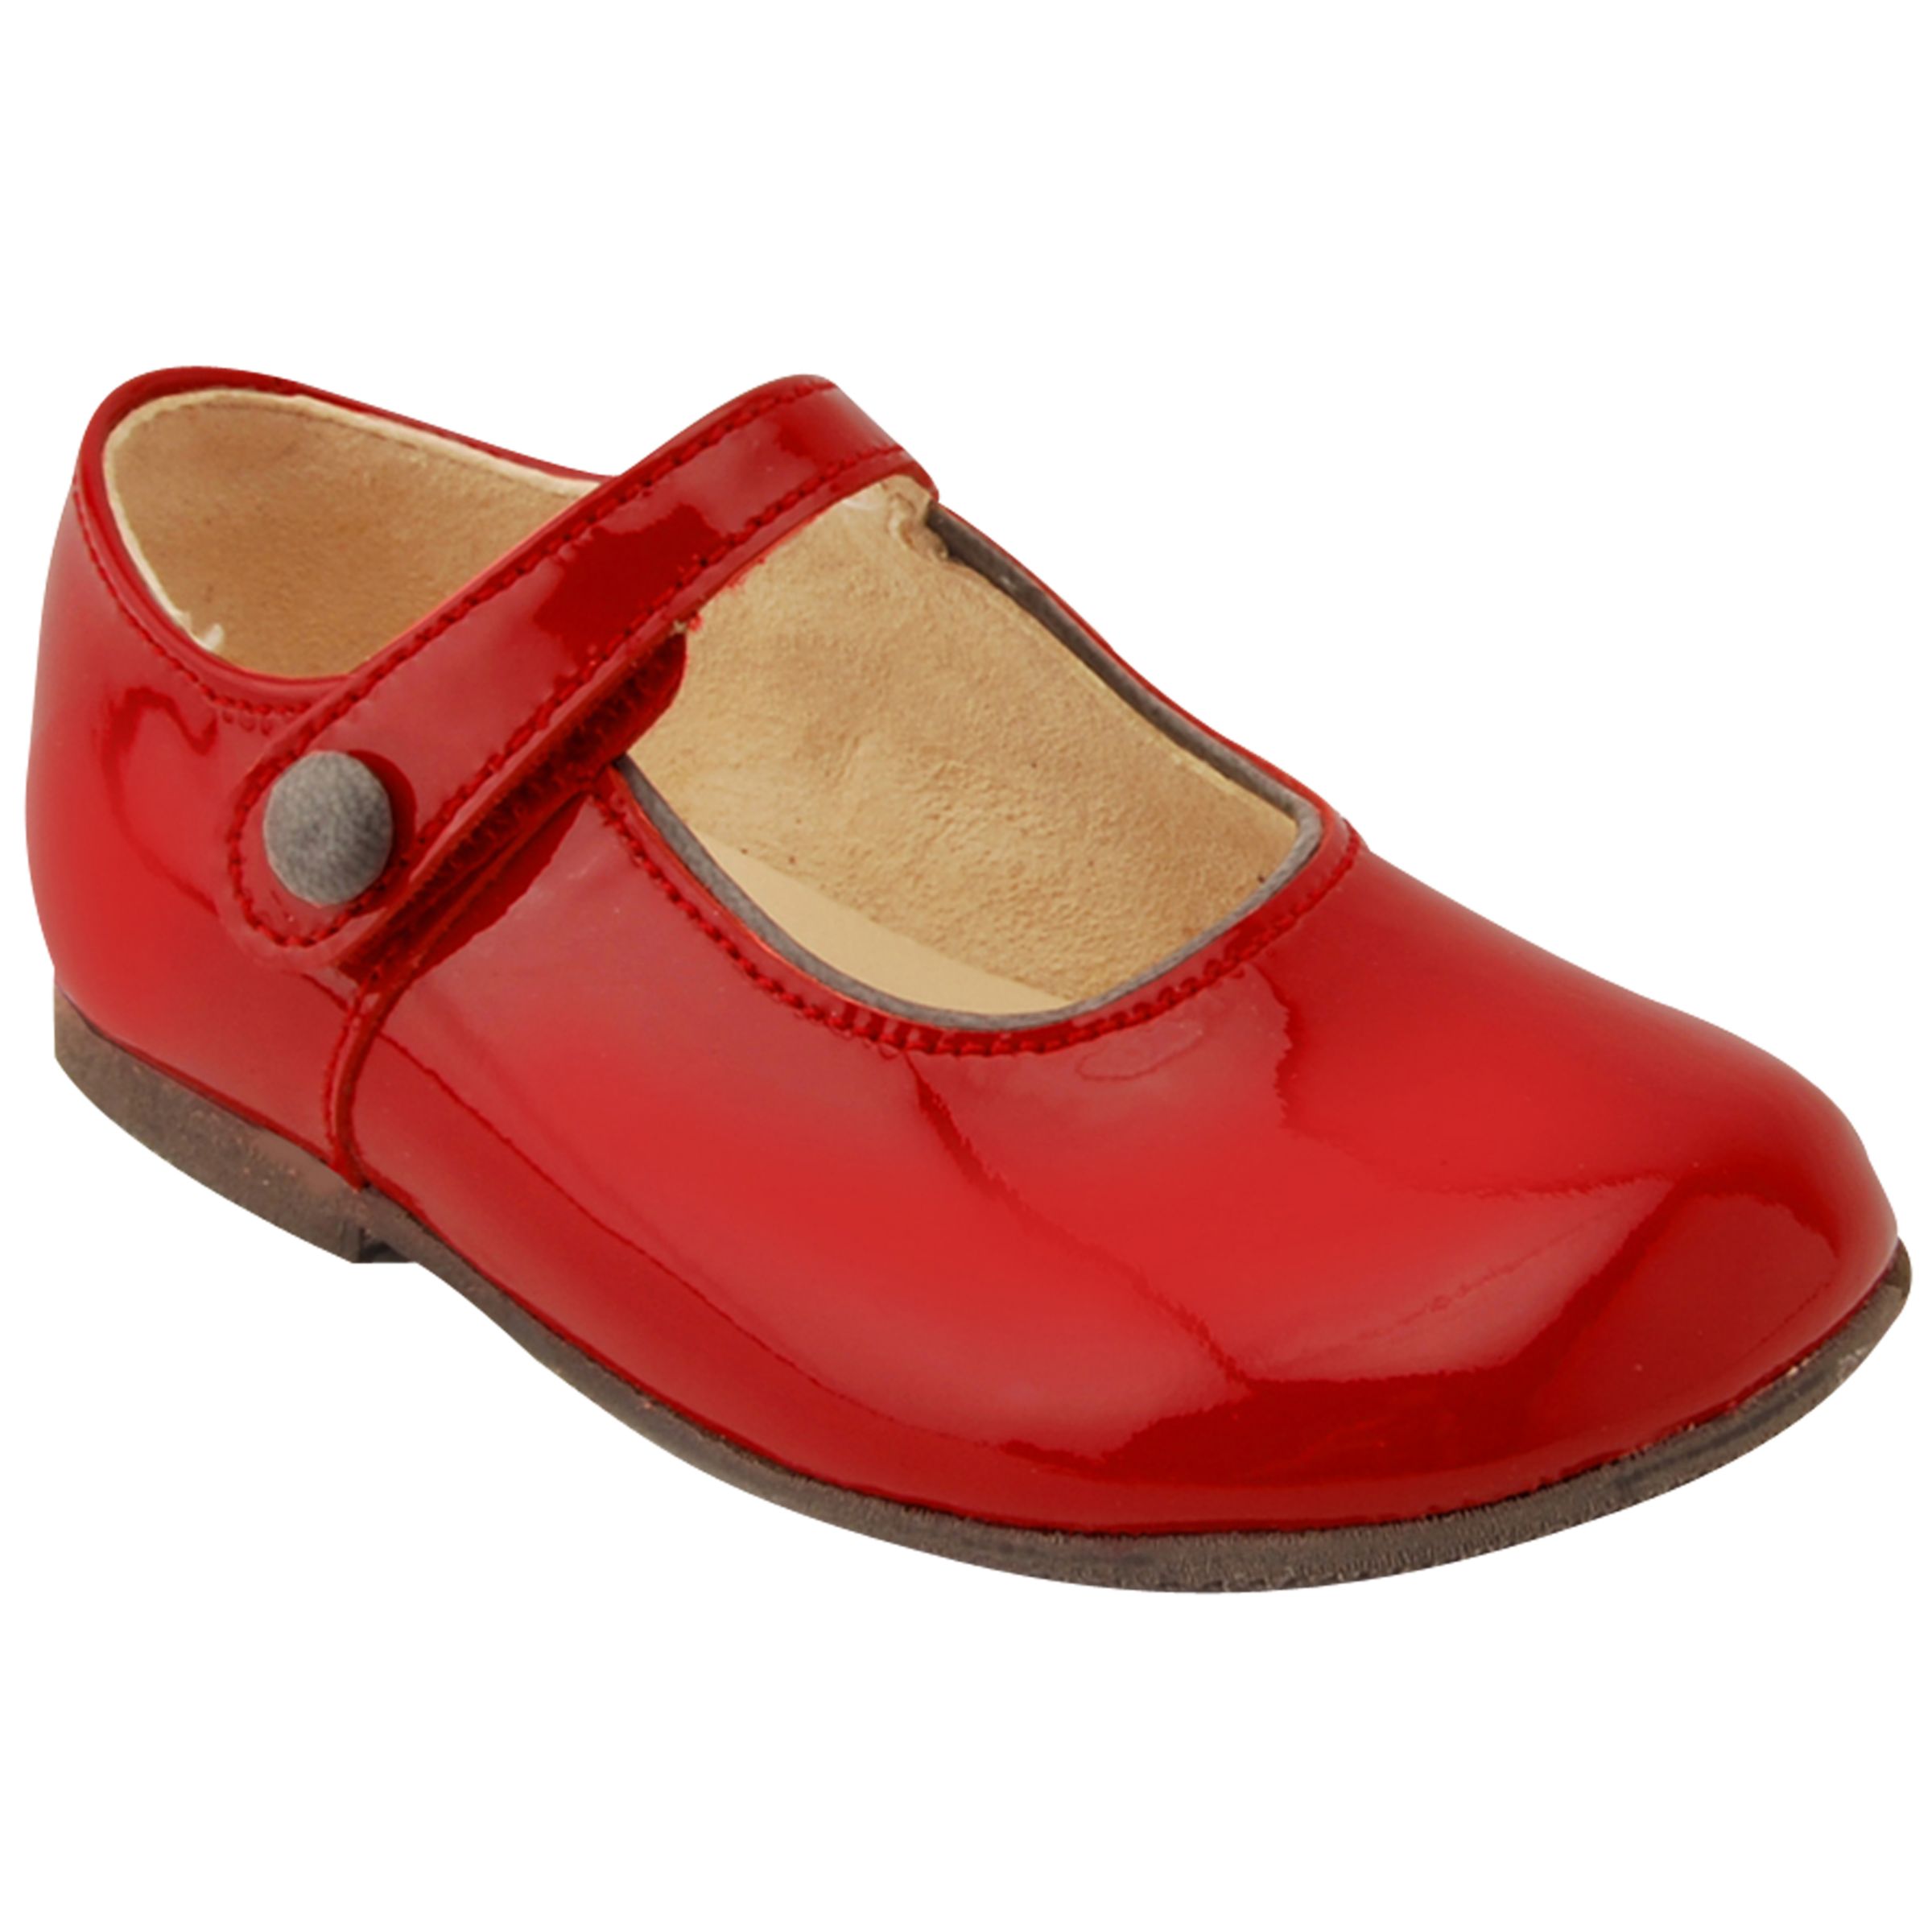 Girls Mary Jane Shoes Red leather Start-Rite Nancy Toddler 